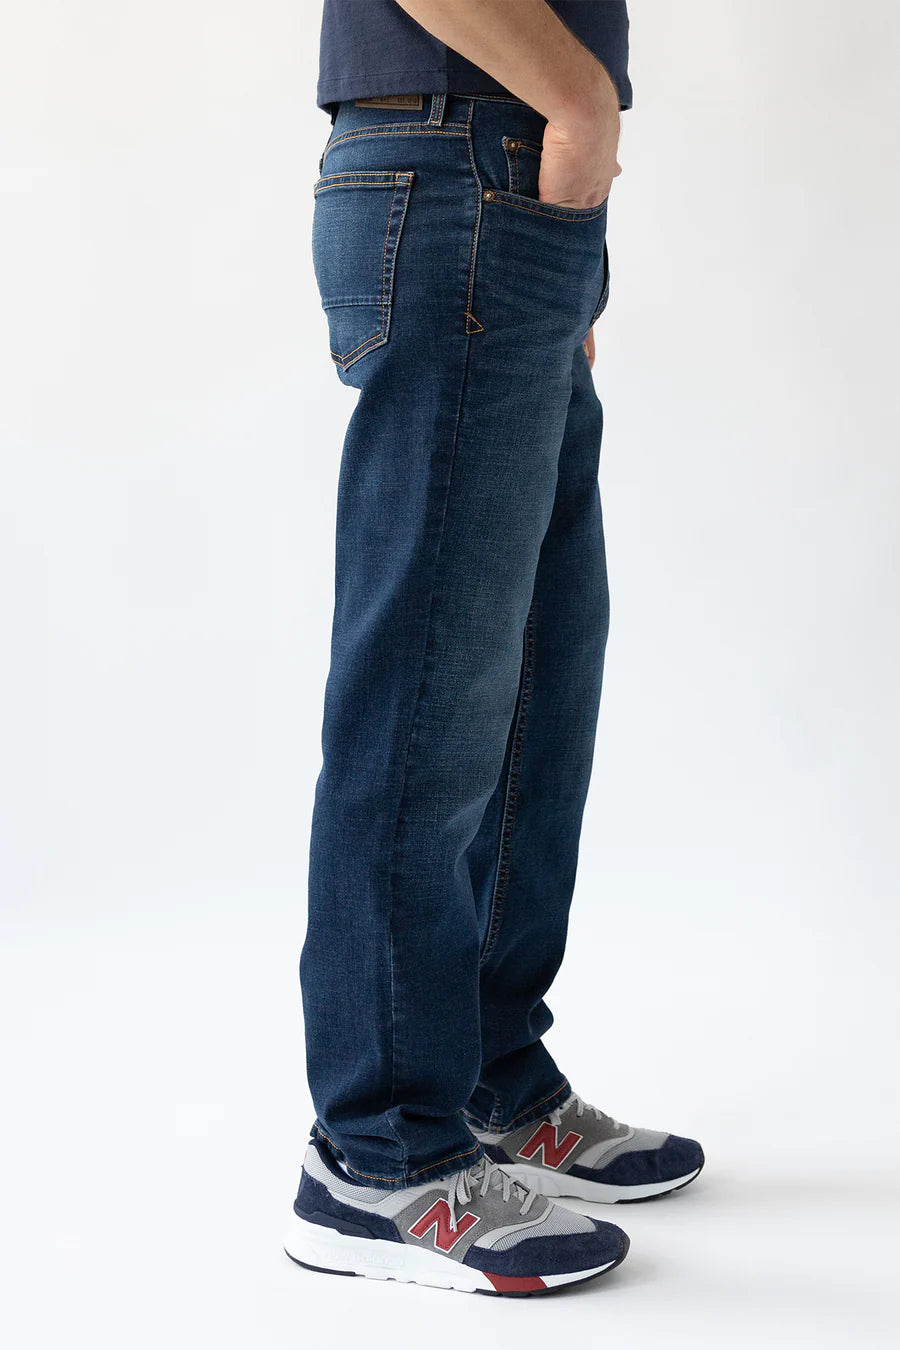 Devil Dog Relaxed Straight Jean - Boone Wash